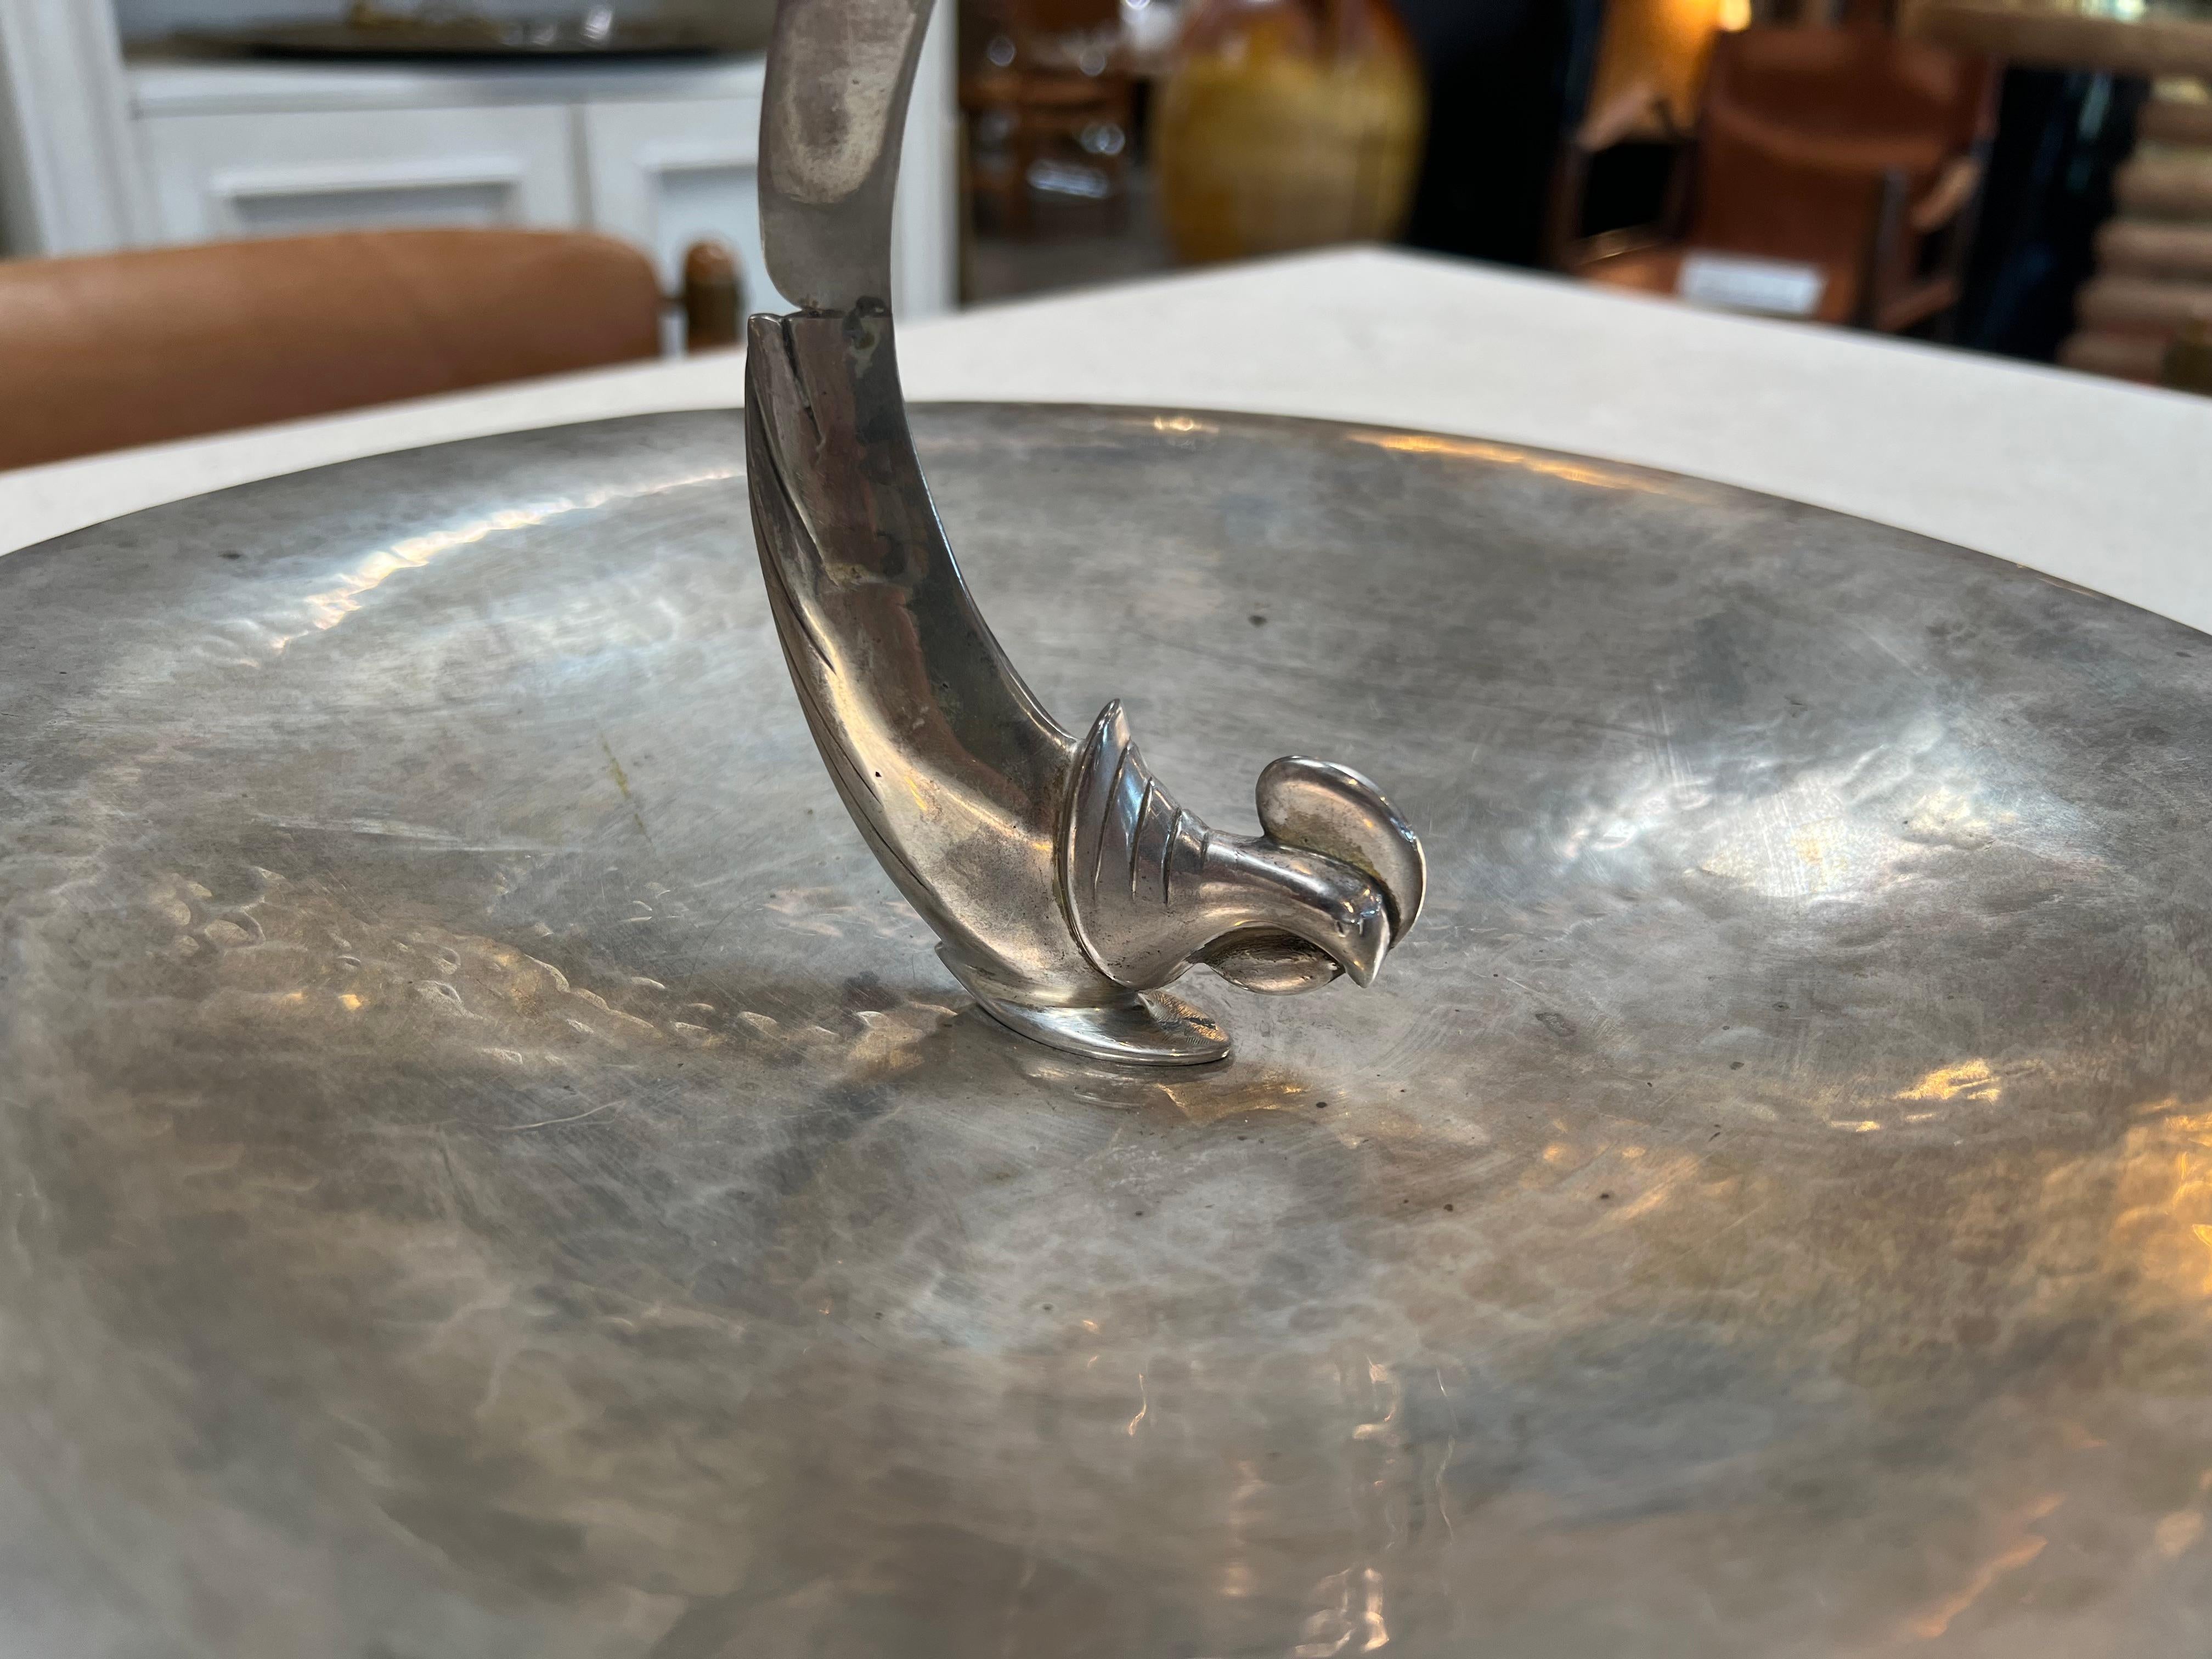 Certainly! The Vintage Decorative Silver Center Bowl from the 1960s is an ornate and collectible silver bowl, showcasing intricate craftsmanship and design typical of that era. It's a stylish and elegant piece that can serve as a centerpiece or